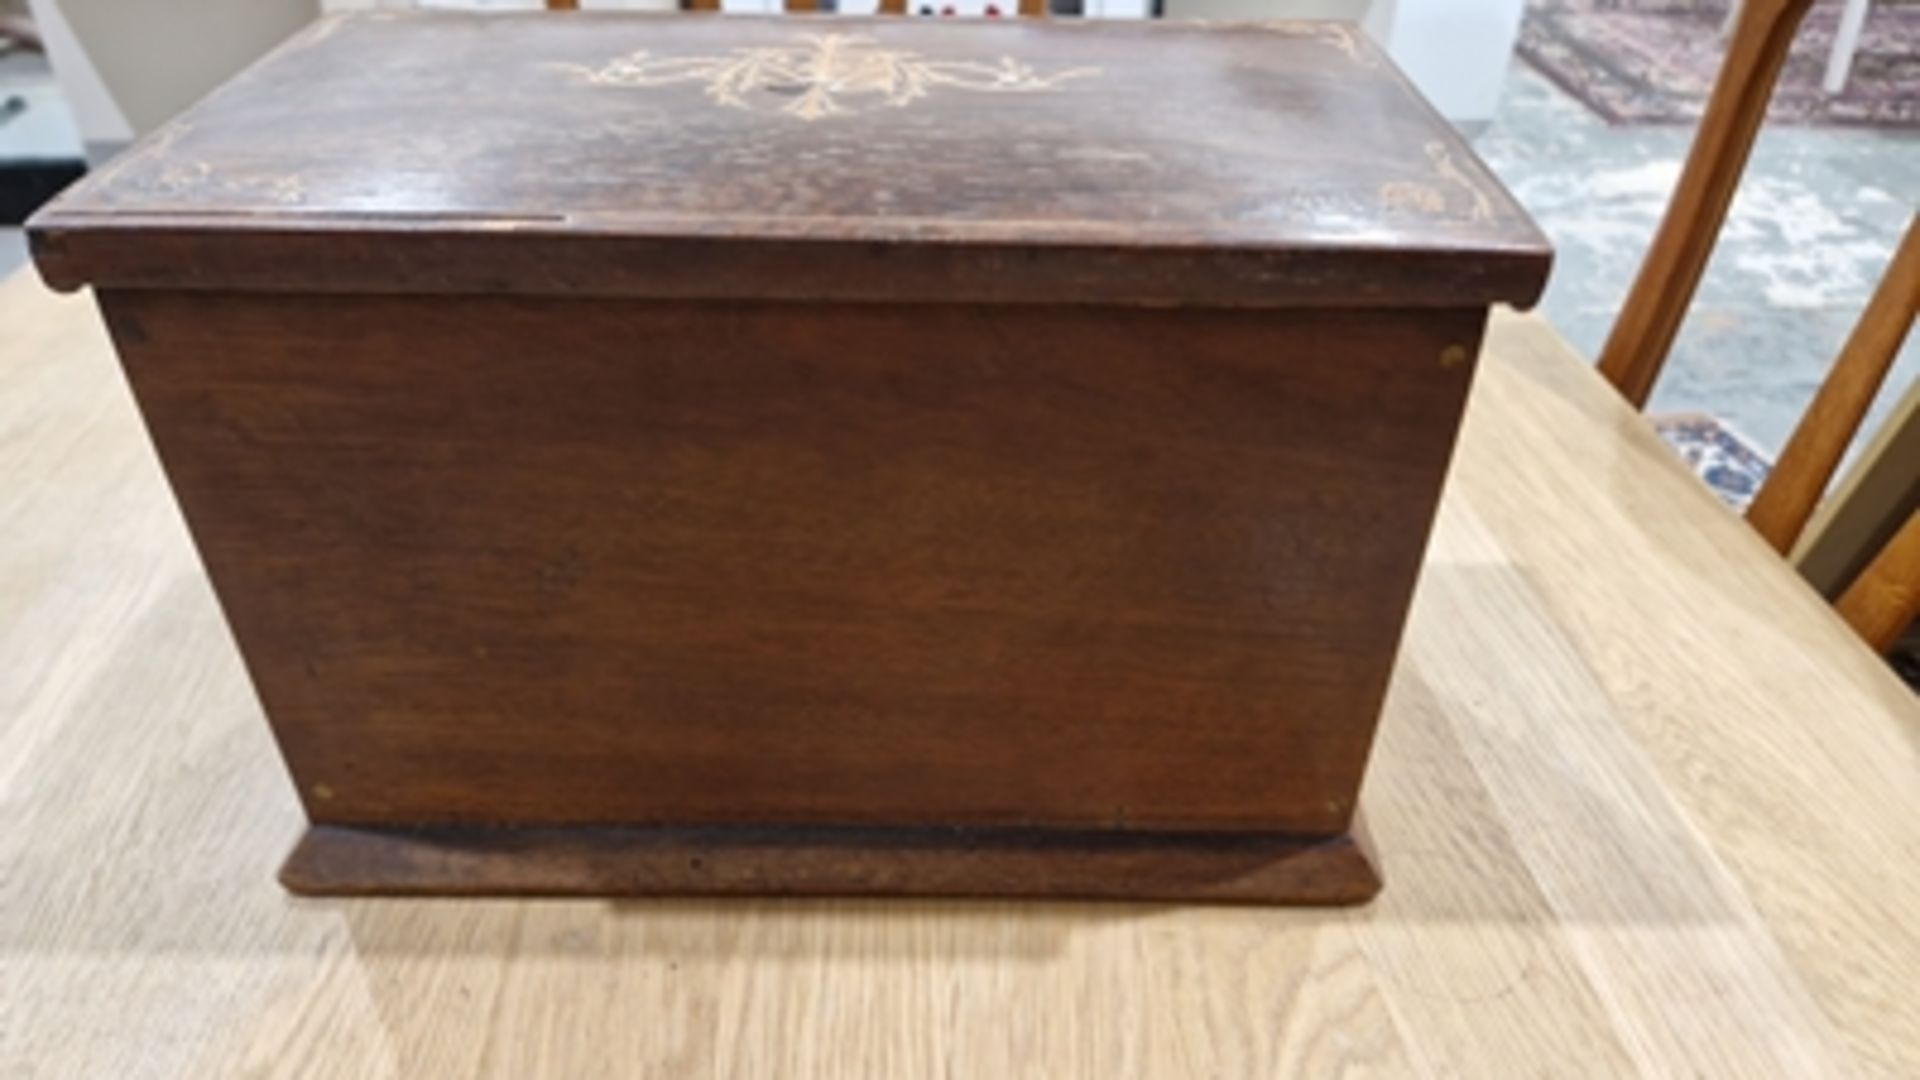 Edwardian marquetry inlaid fall-front stationery casket, the front with leather lined fold-out - Image 10 of 54